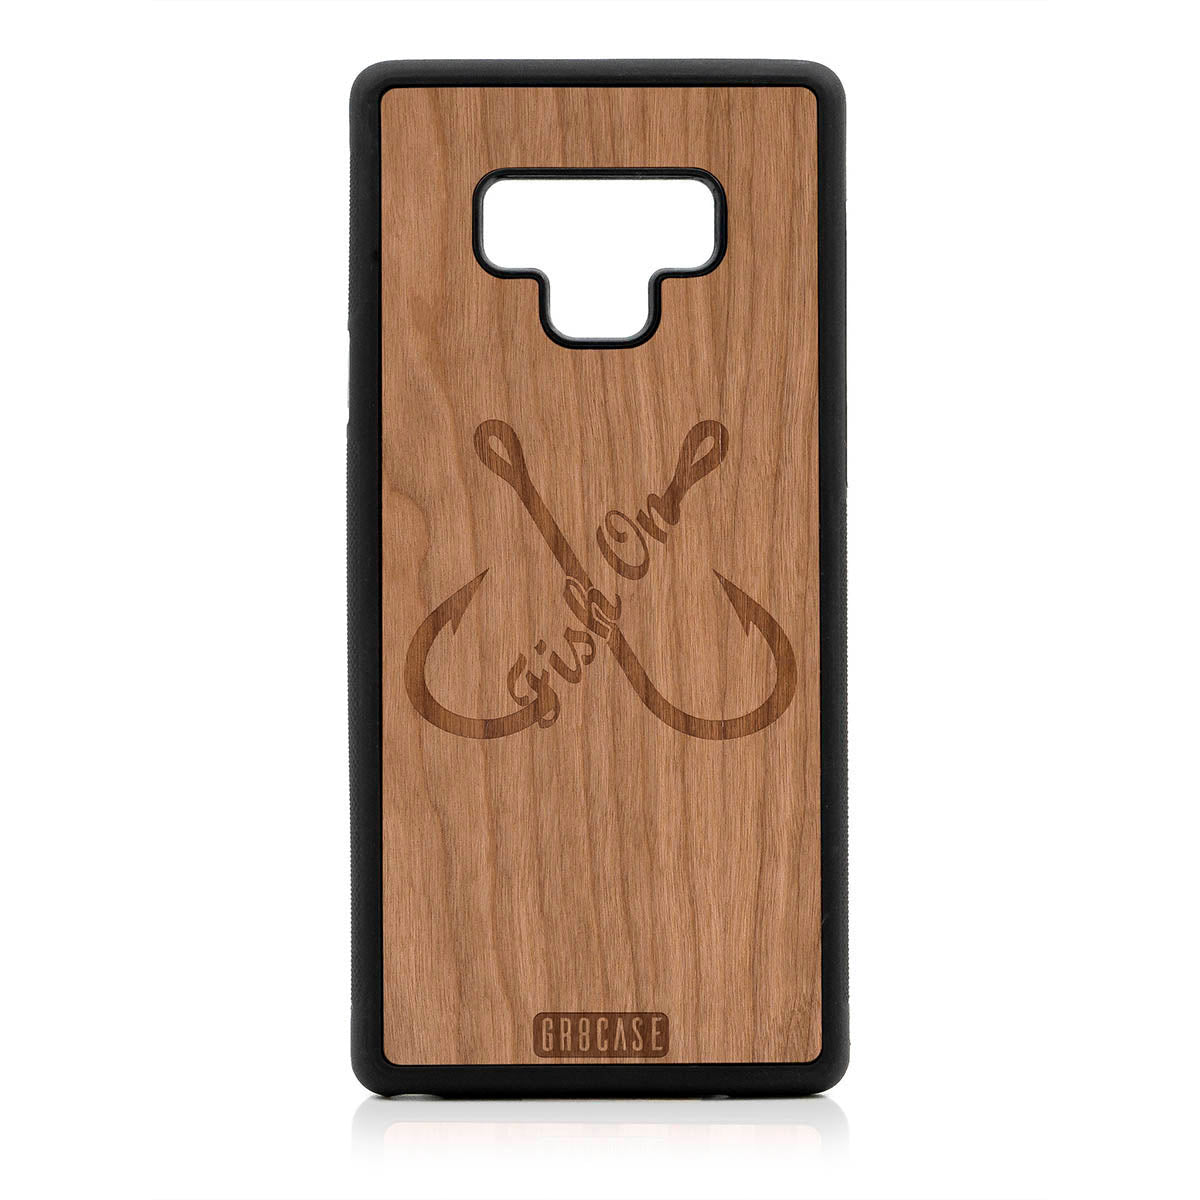 Fish On (Fish Hooks) Design Wood Case For Samsung Galaxy Note 9 by GR8CASE